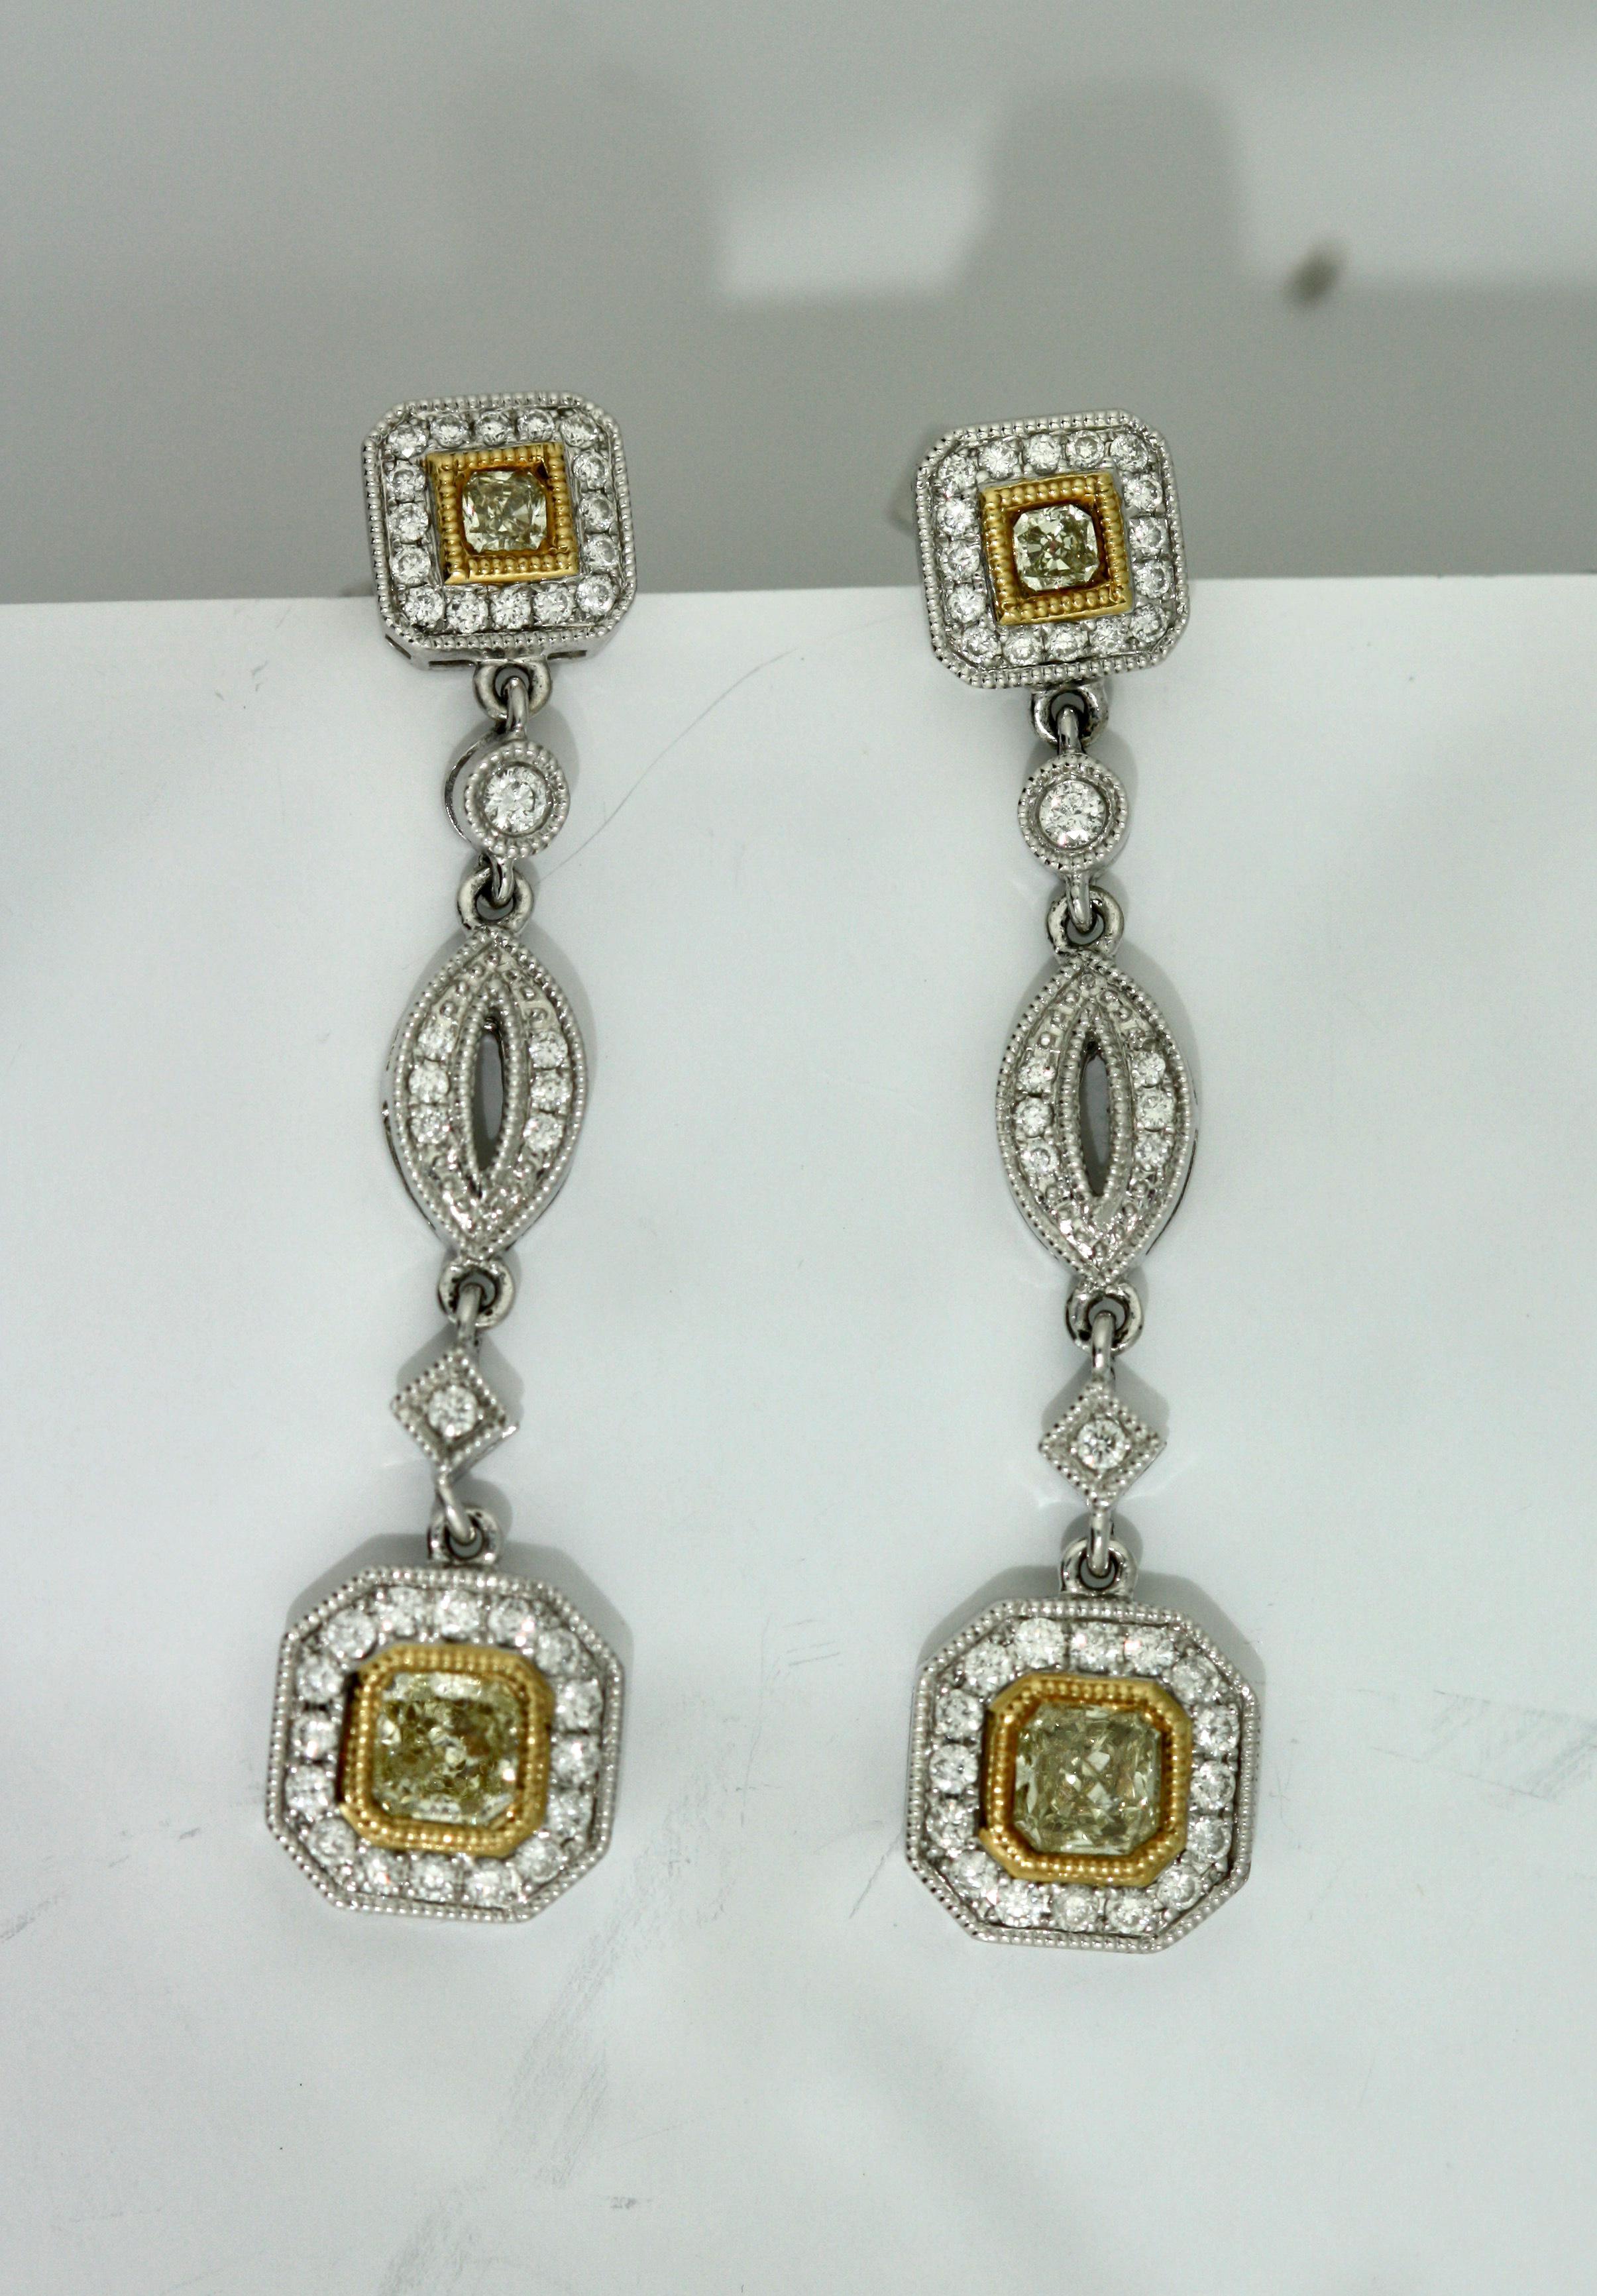 Pair of Yellow Diamond and Diamond Earrings
Each set with diamonds, post fittings, diamonds weighing a total of approximately 1.18 carats mounted in 18 karat white gold